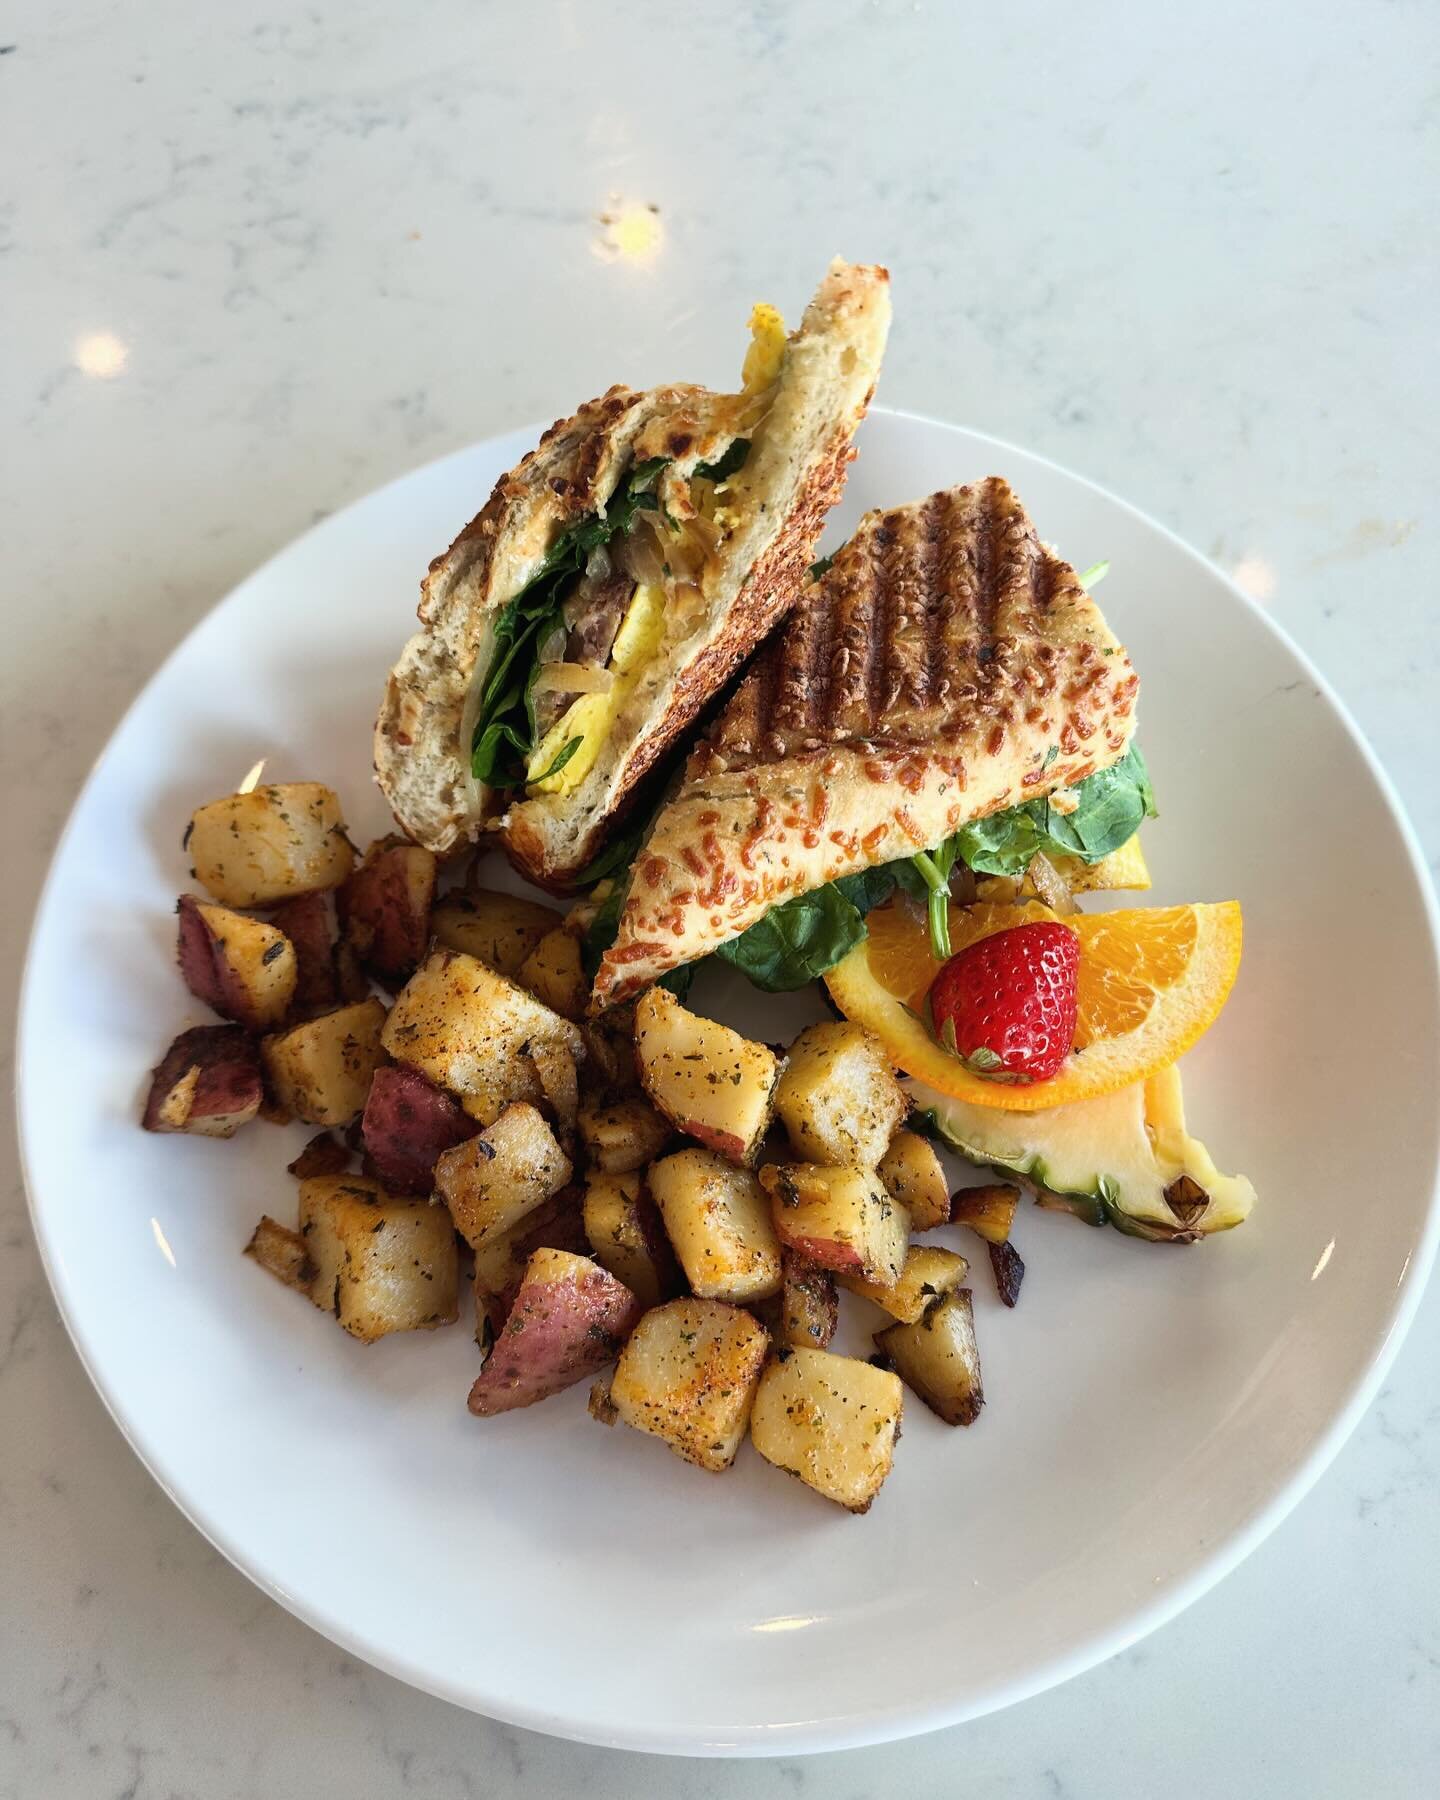 Come try our delicious Belle&rsquo;s specials this weekend! We are open for breakfast or lunch daily from 7:30am-3:00pm. We can&rsquo;t wait to see you! ☕️🥓🍳🥞

-Day Break Panini: Short rib, scrambled eggs, cheddar, spinach, caramelized onion and c